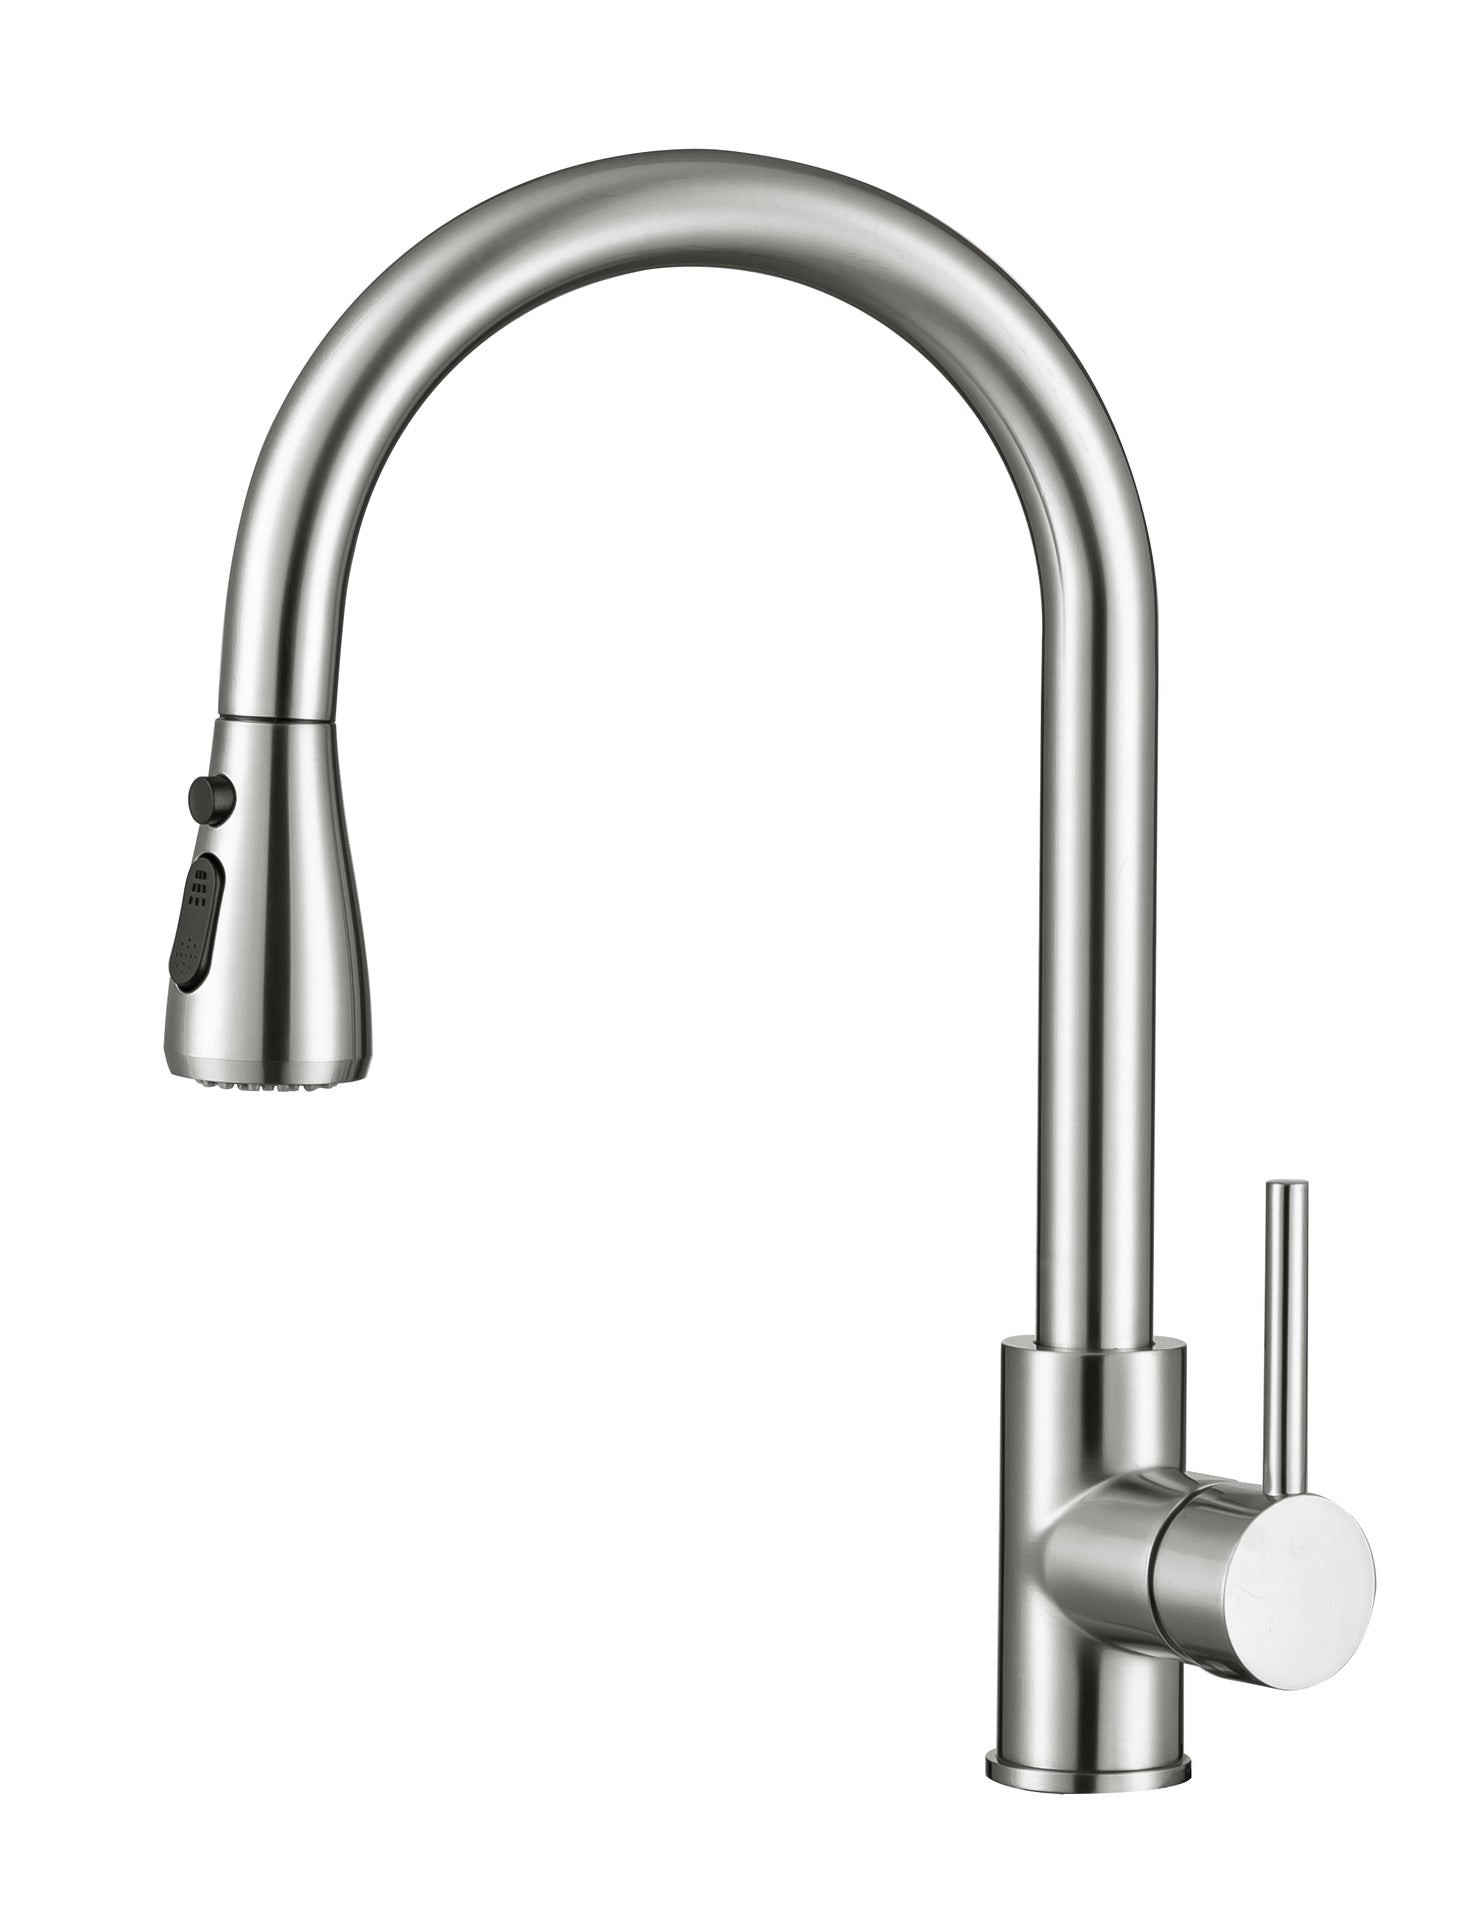 Kitchen Sink Faucet, Kitchen Faucet Brass with Pull Down Sprayer